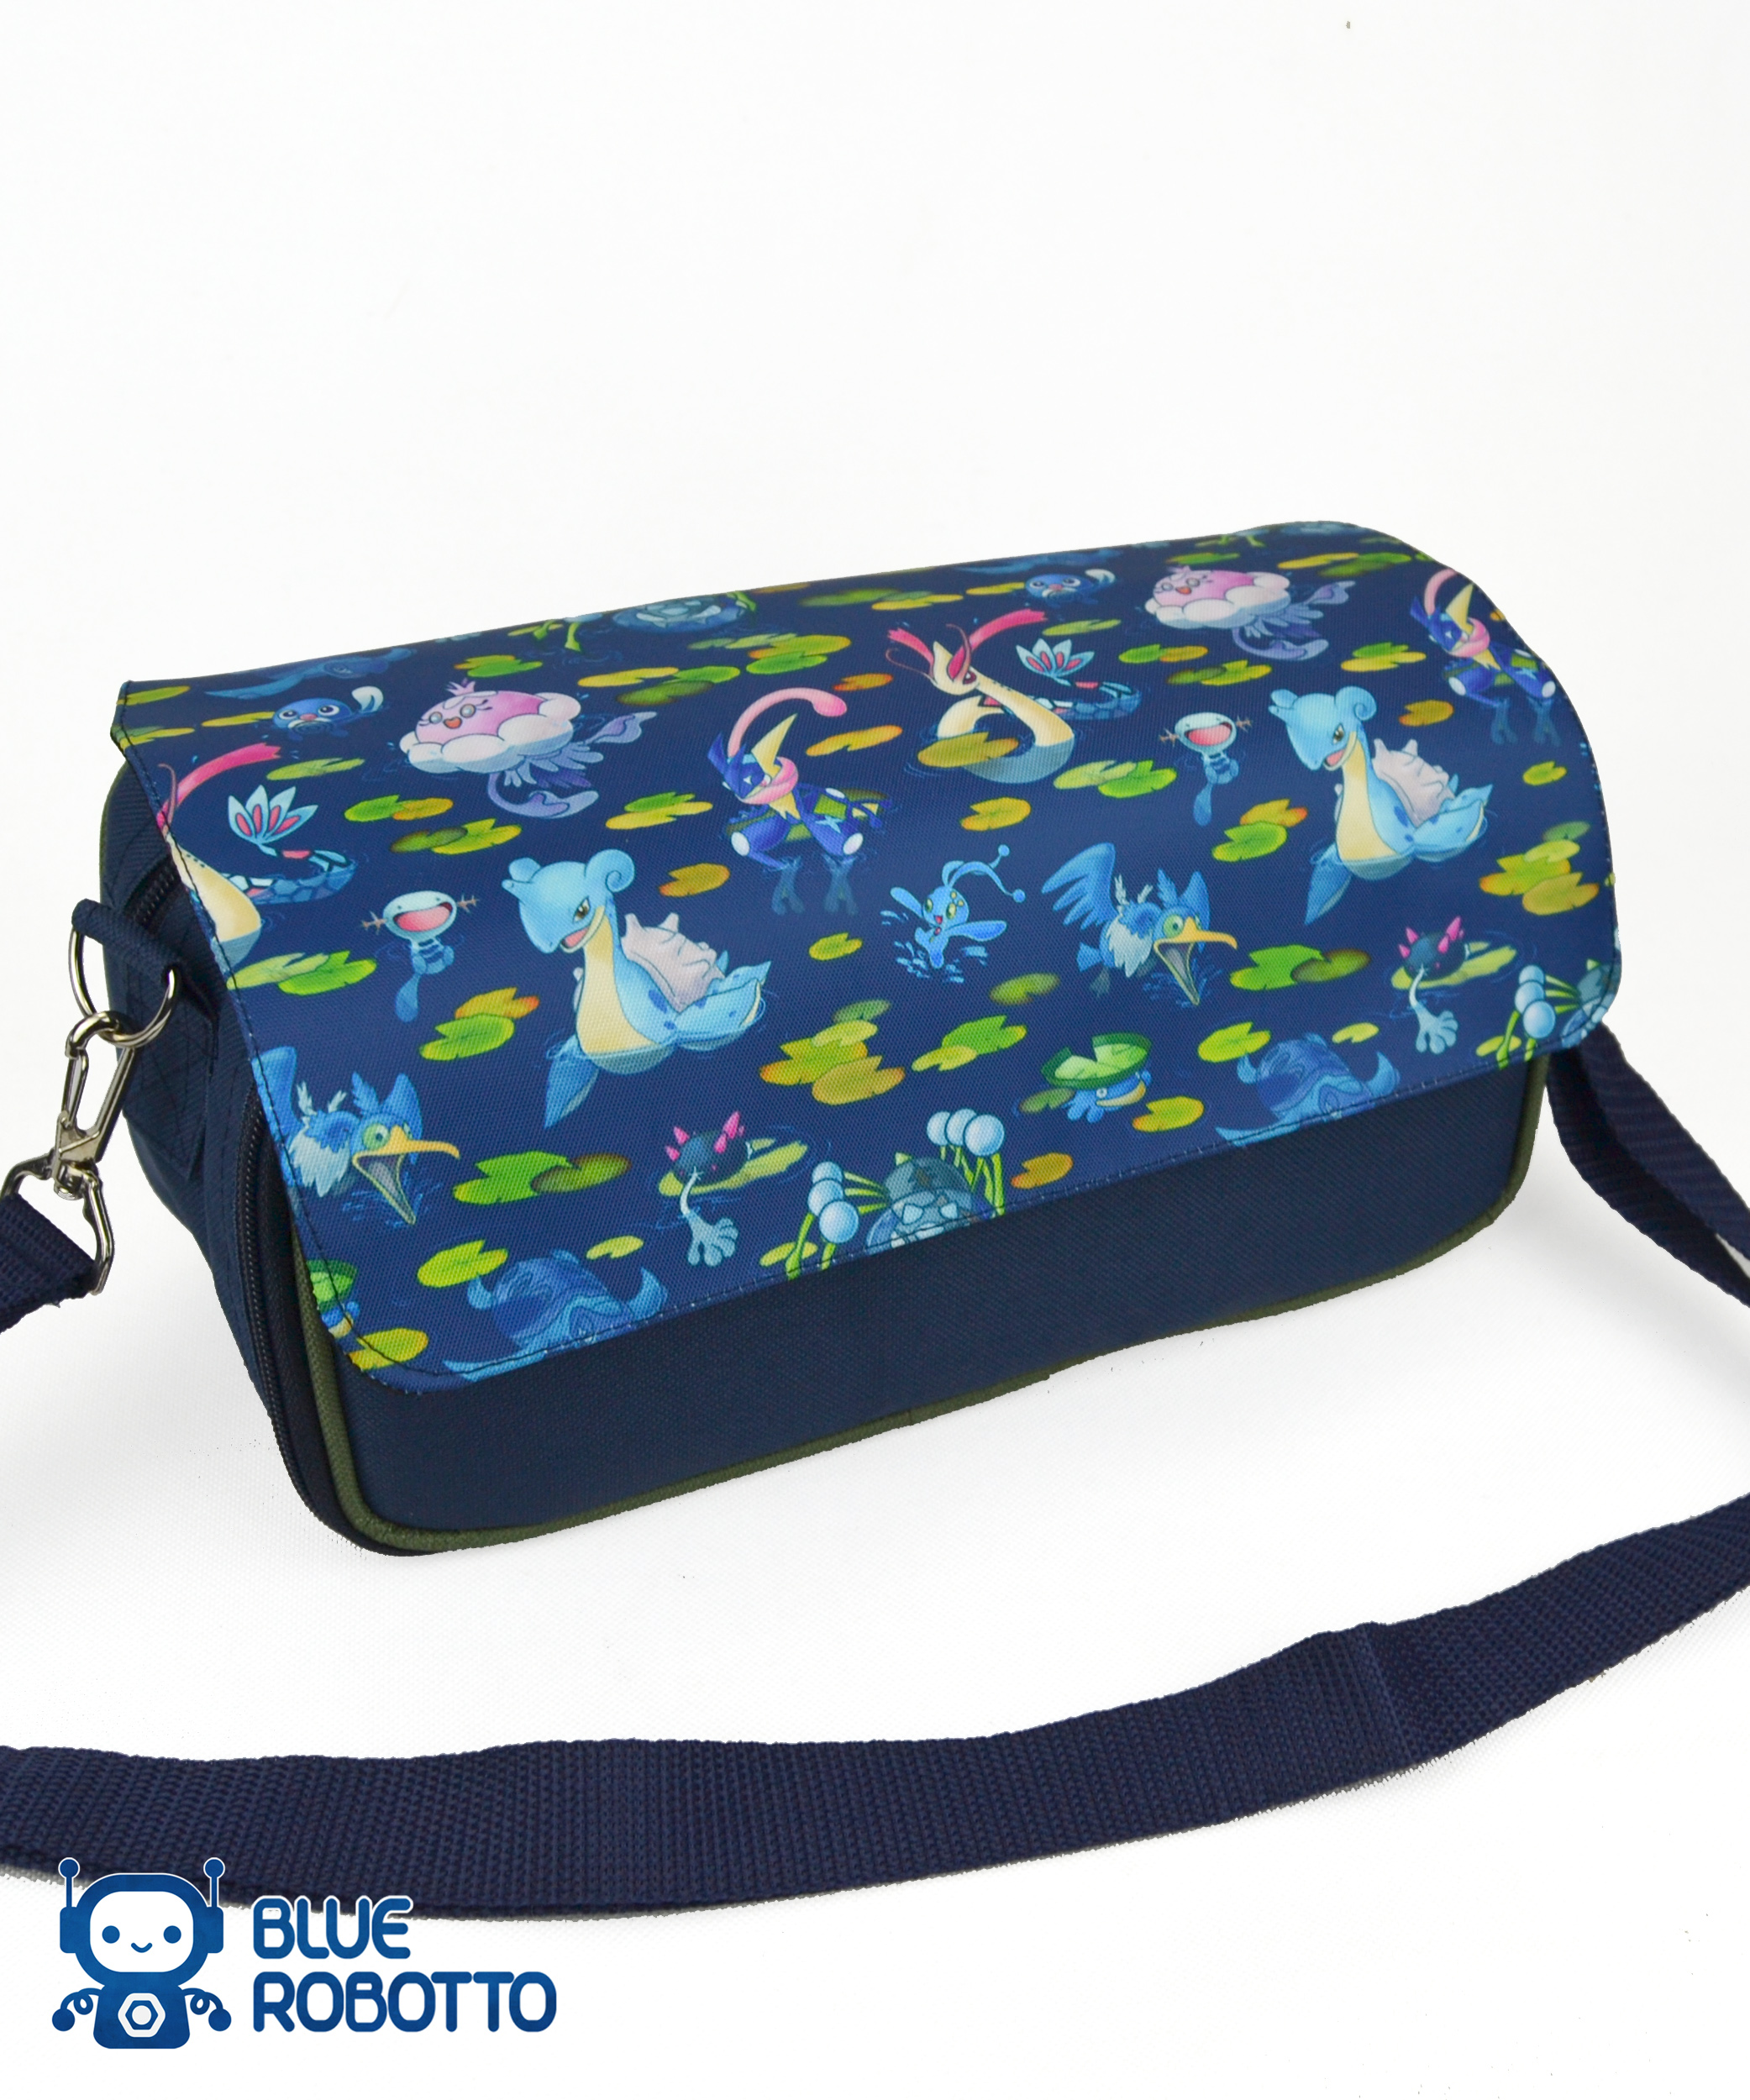 Poke Pond – Nintendo Switch and accessories bag –